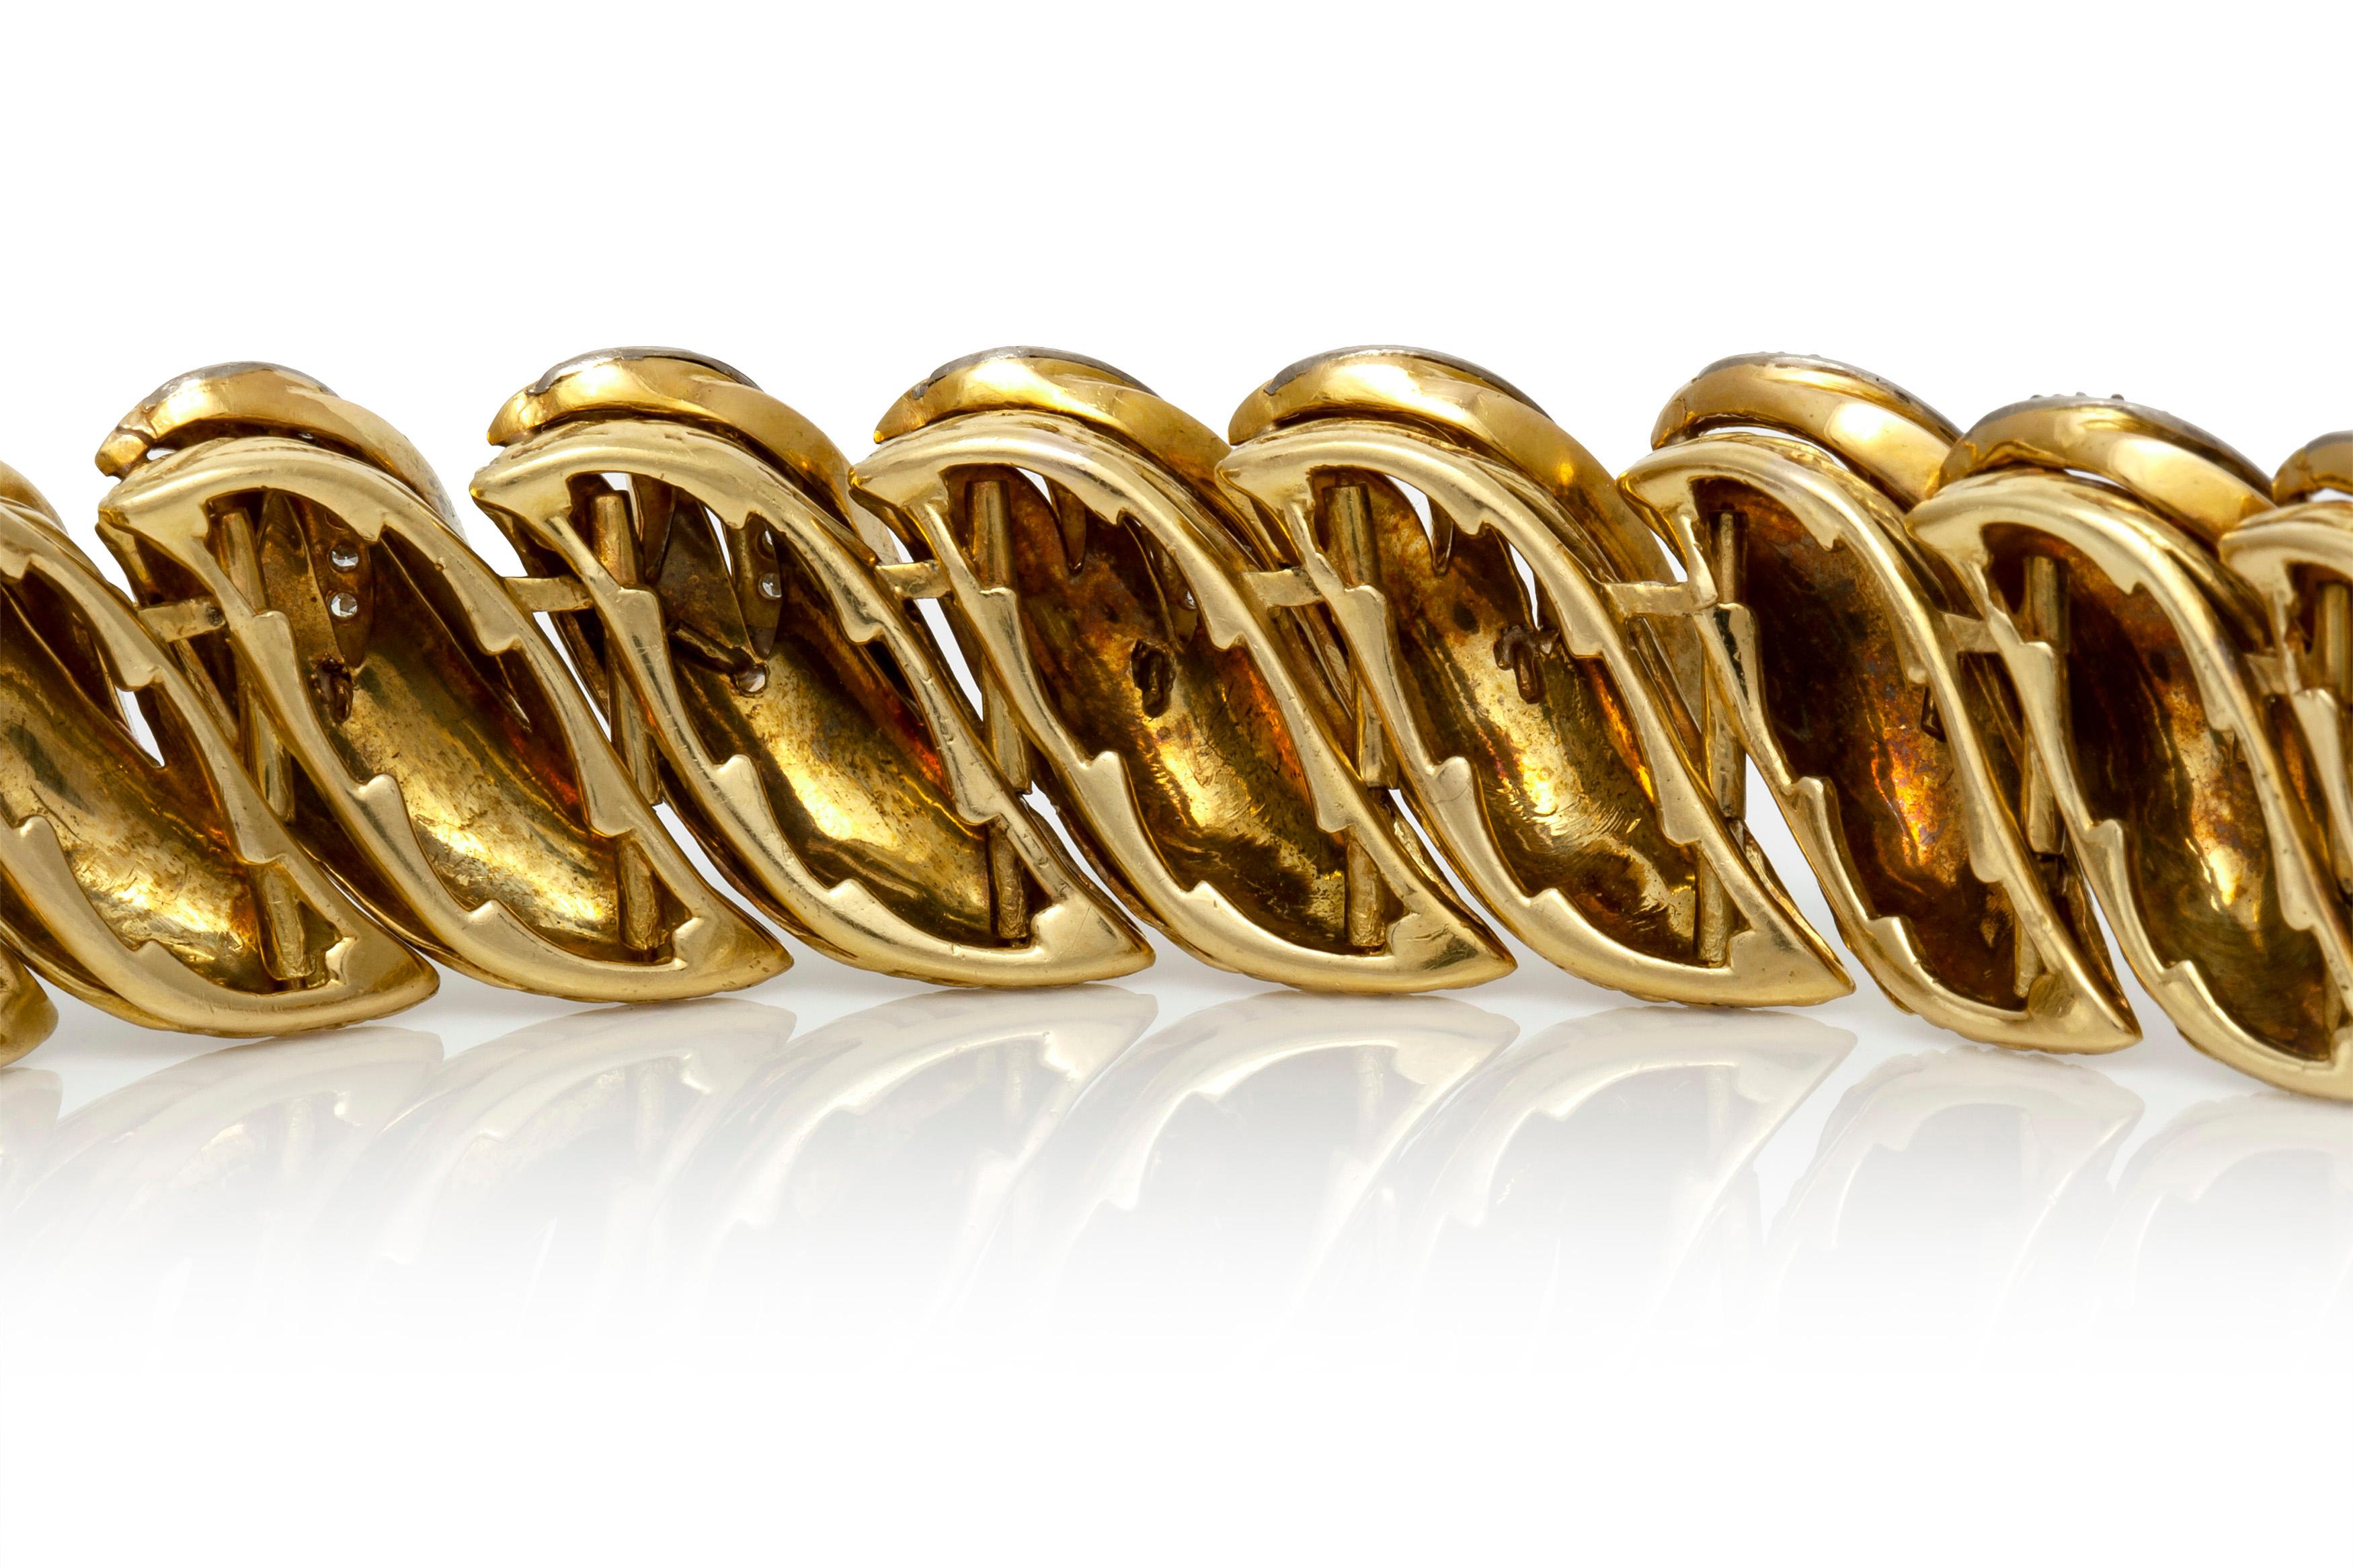 The bracelet is finely crafted in 18k yellow gold with diamonds weighing approximately total of 1.50 carat.
